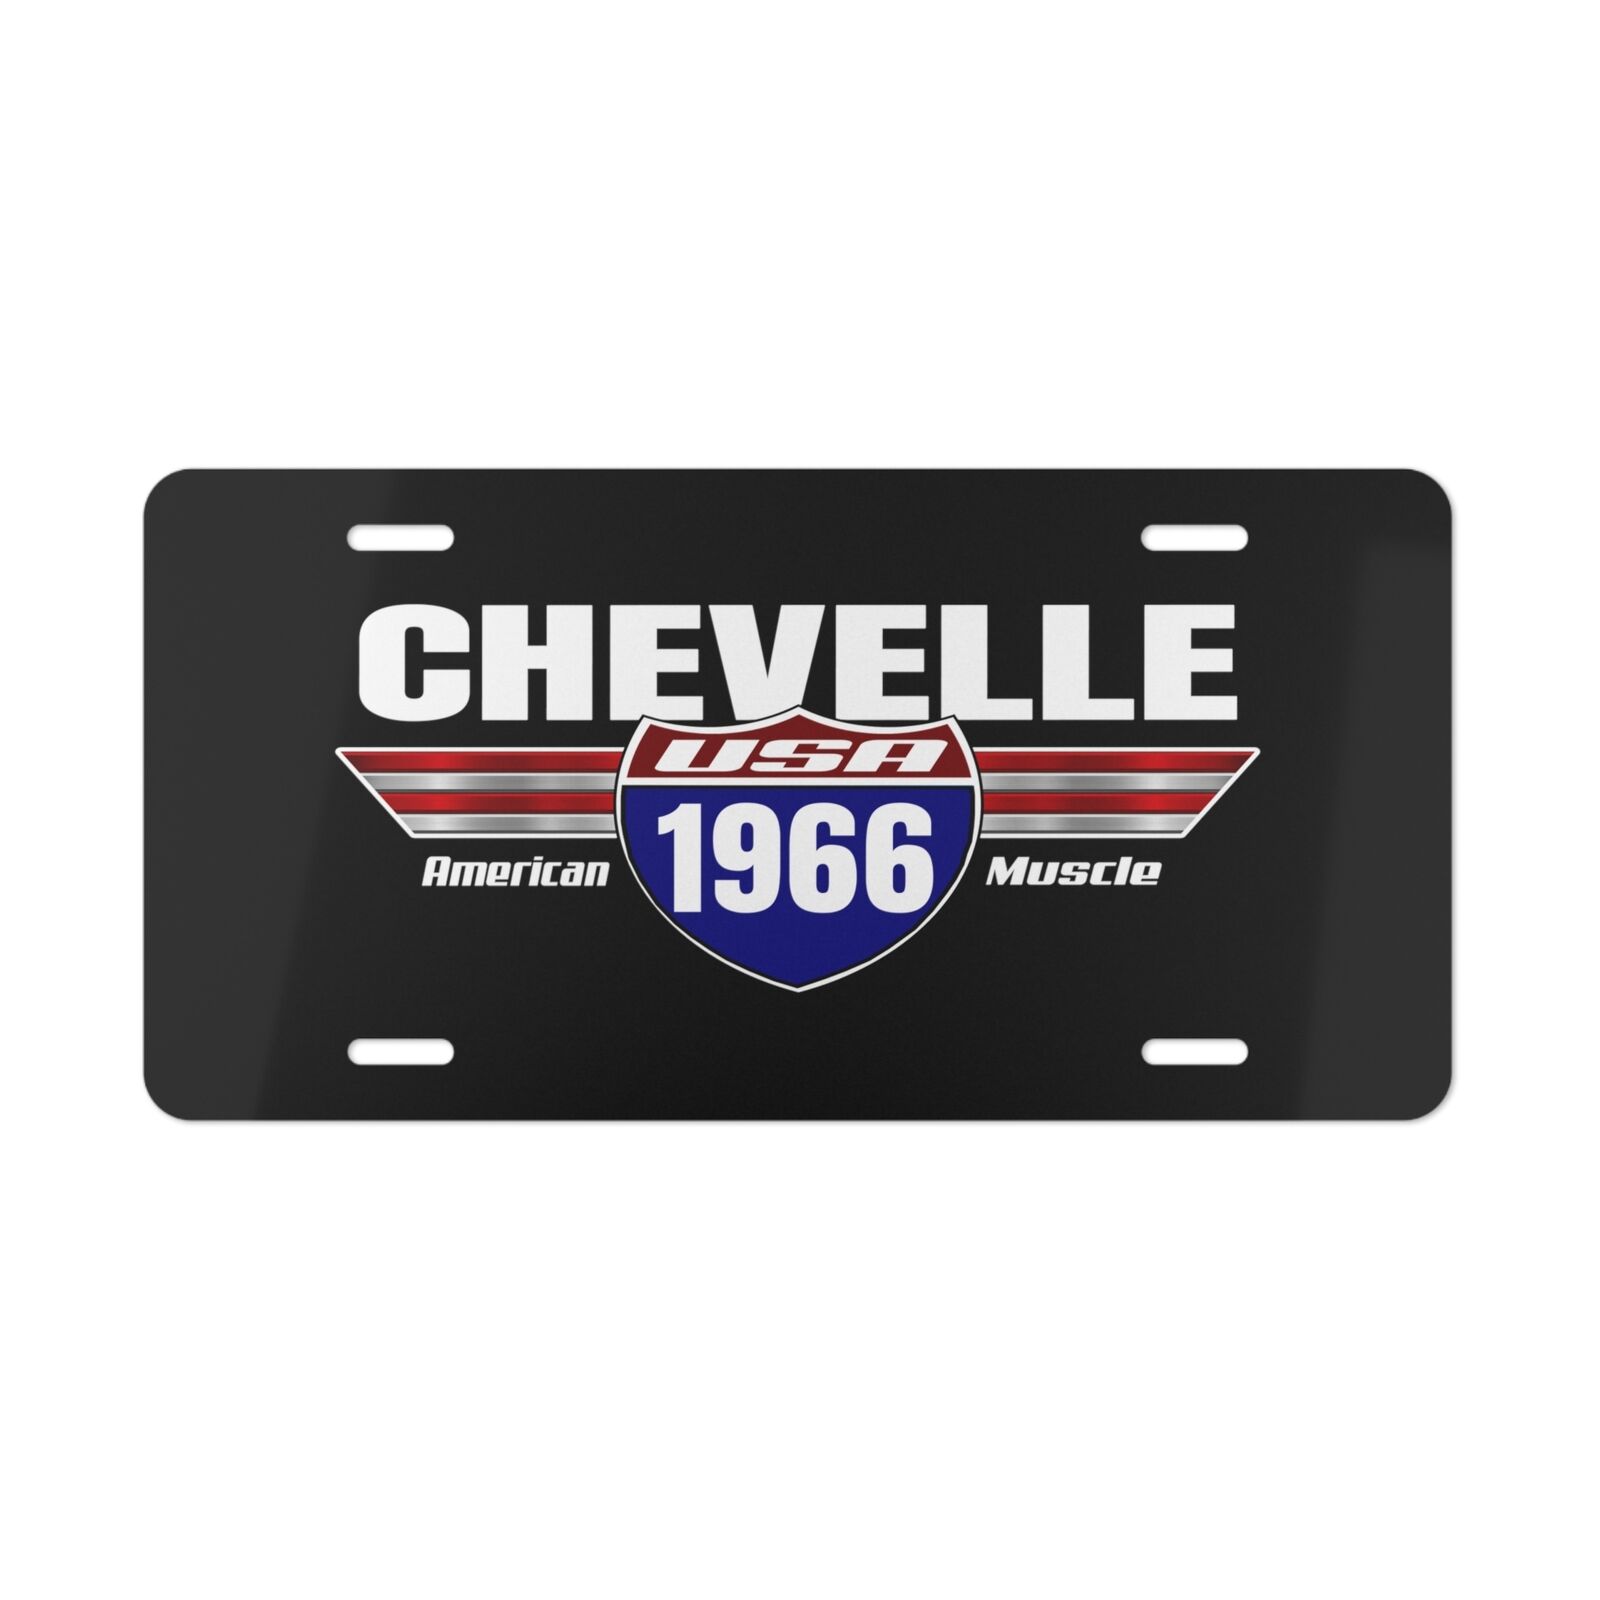 1966 Chevelle Classic Car License Plate Tag - Made in The USA